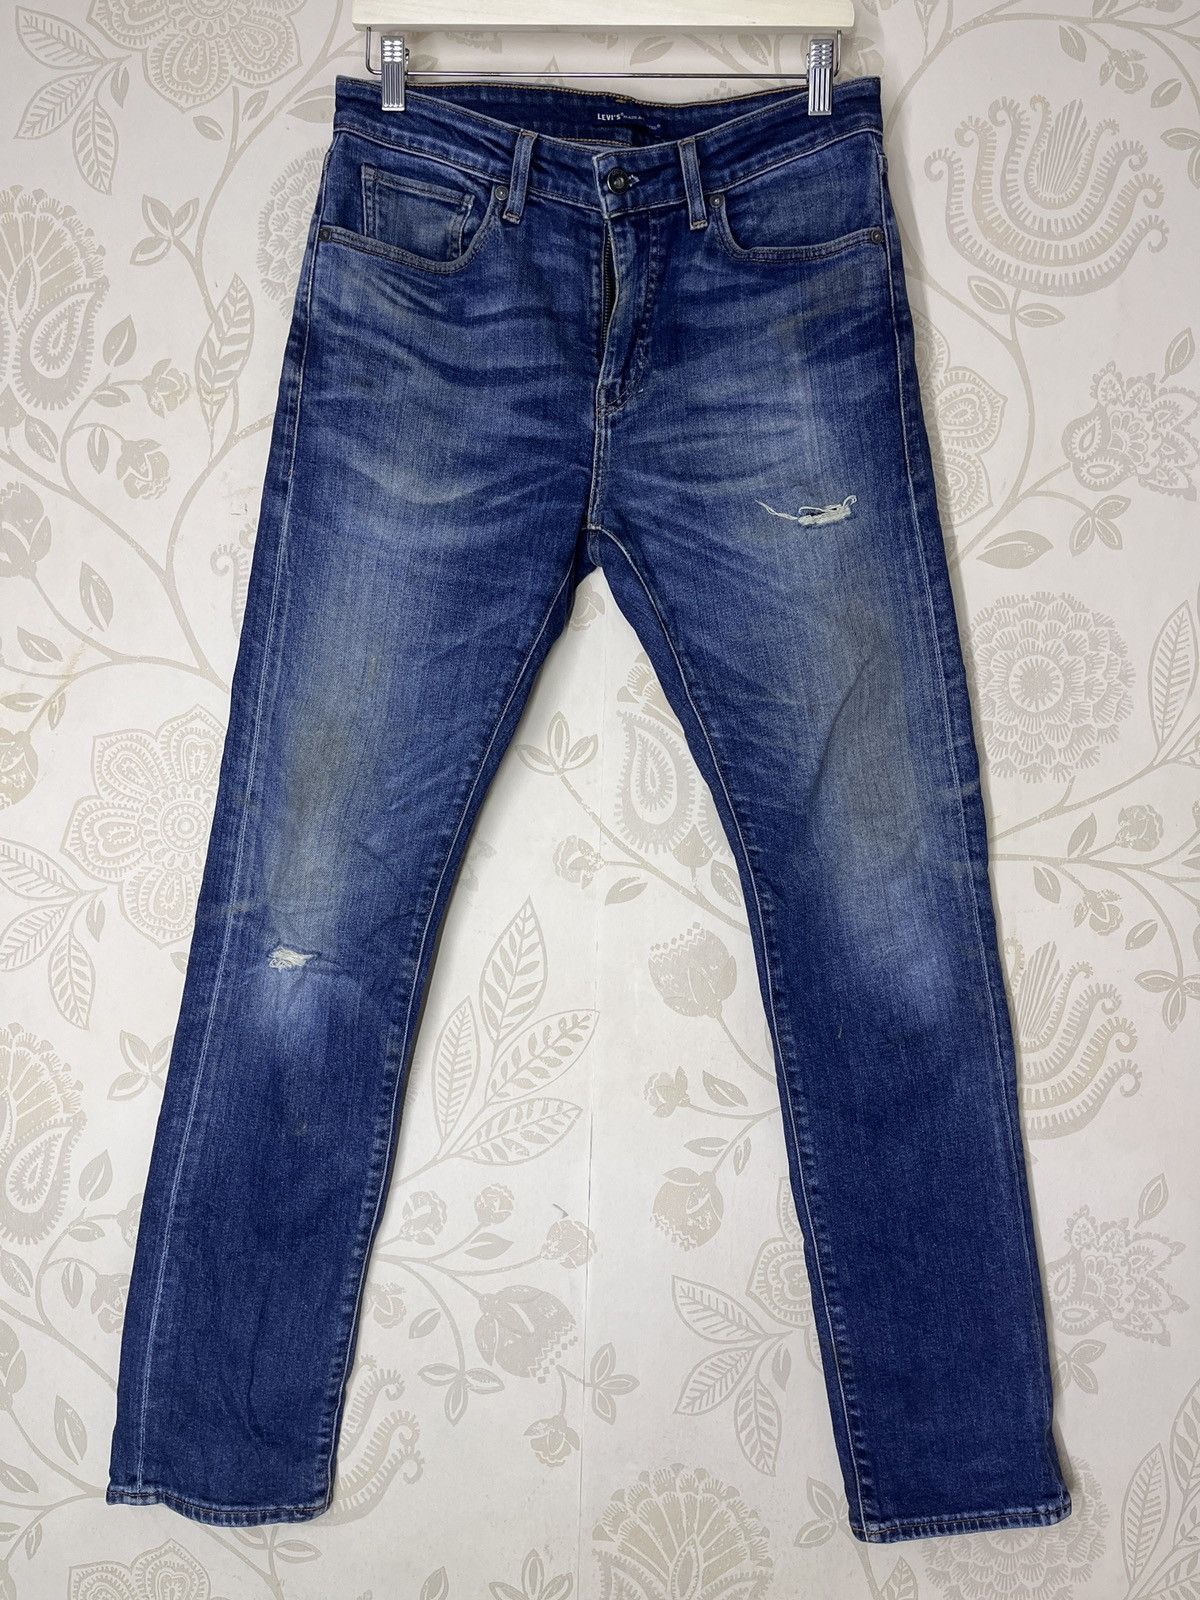 Levis Made & Crafted Blue Label Distressed Denim Jeans - 1